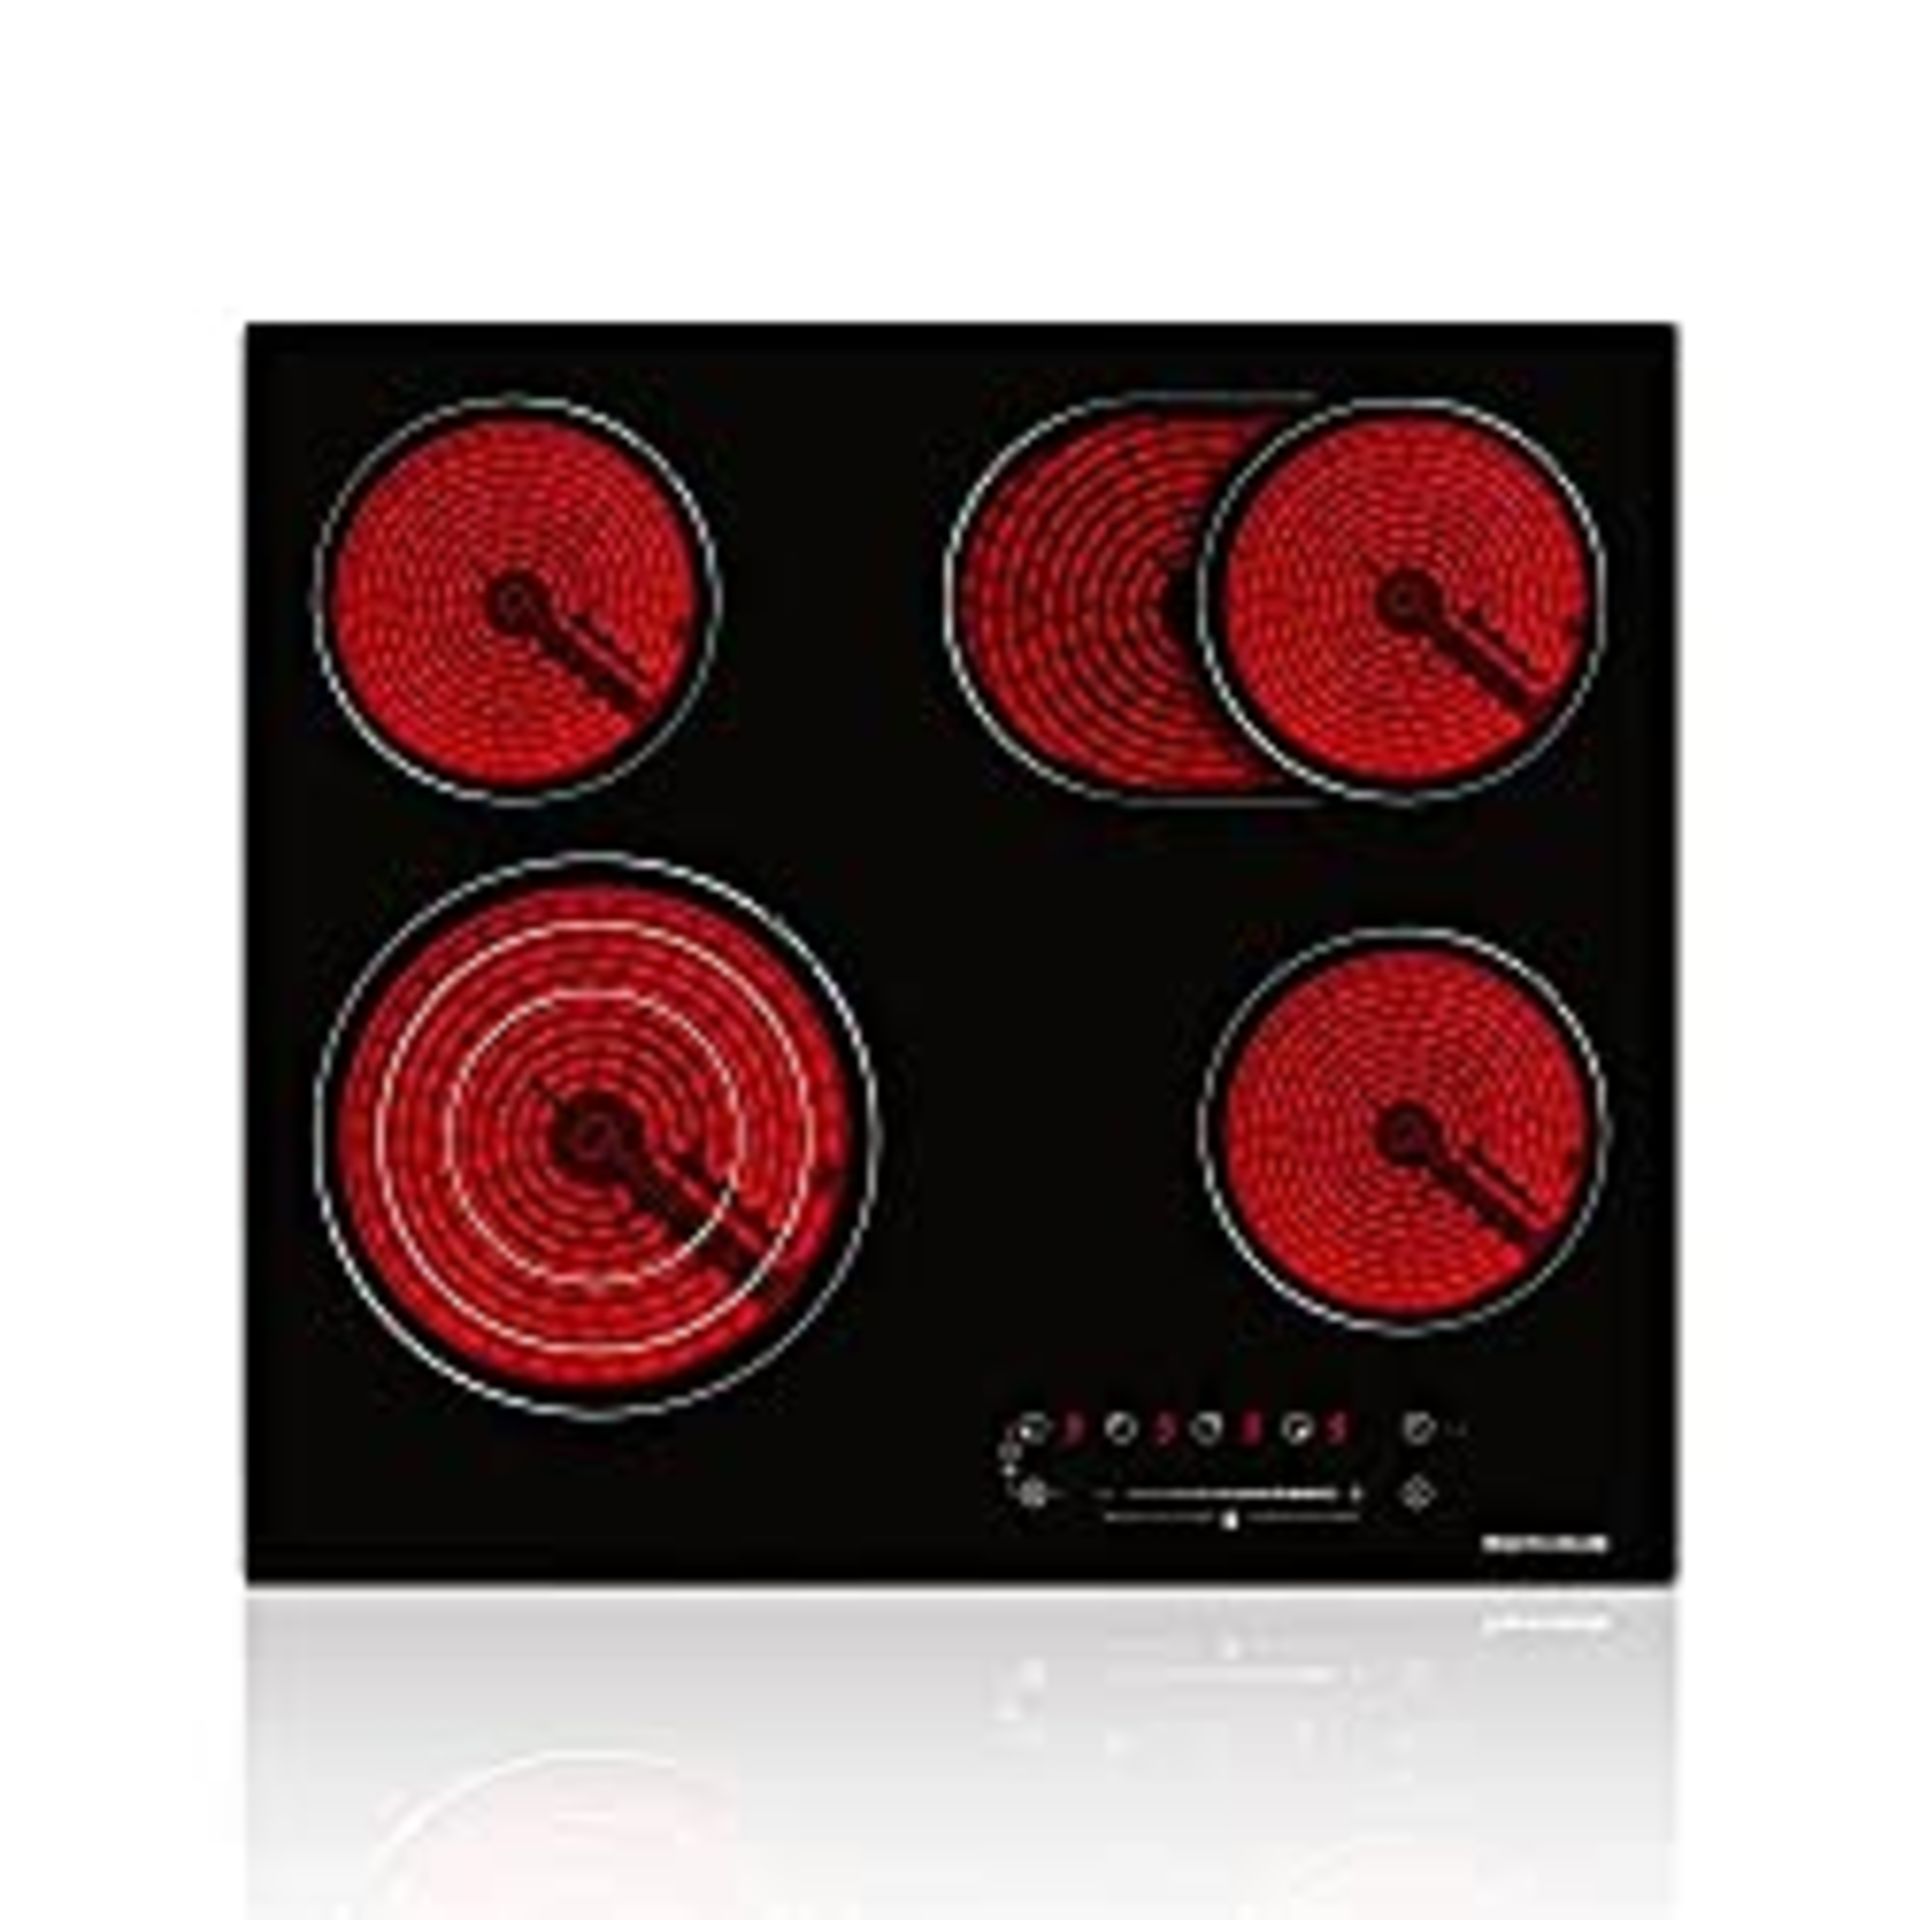 RRP £134.99 Thermomate CHTB604 60cm Ceramic Hob Built-in